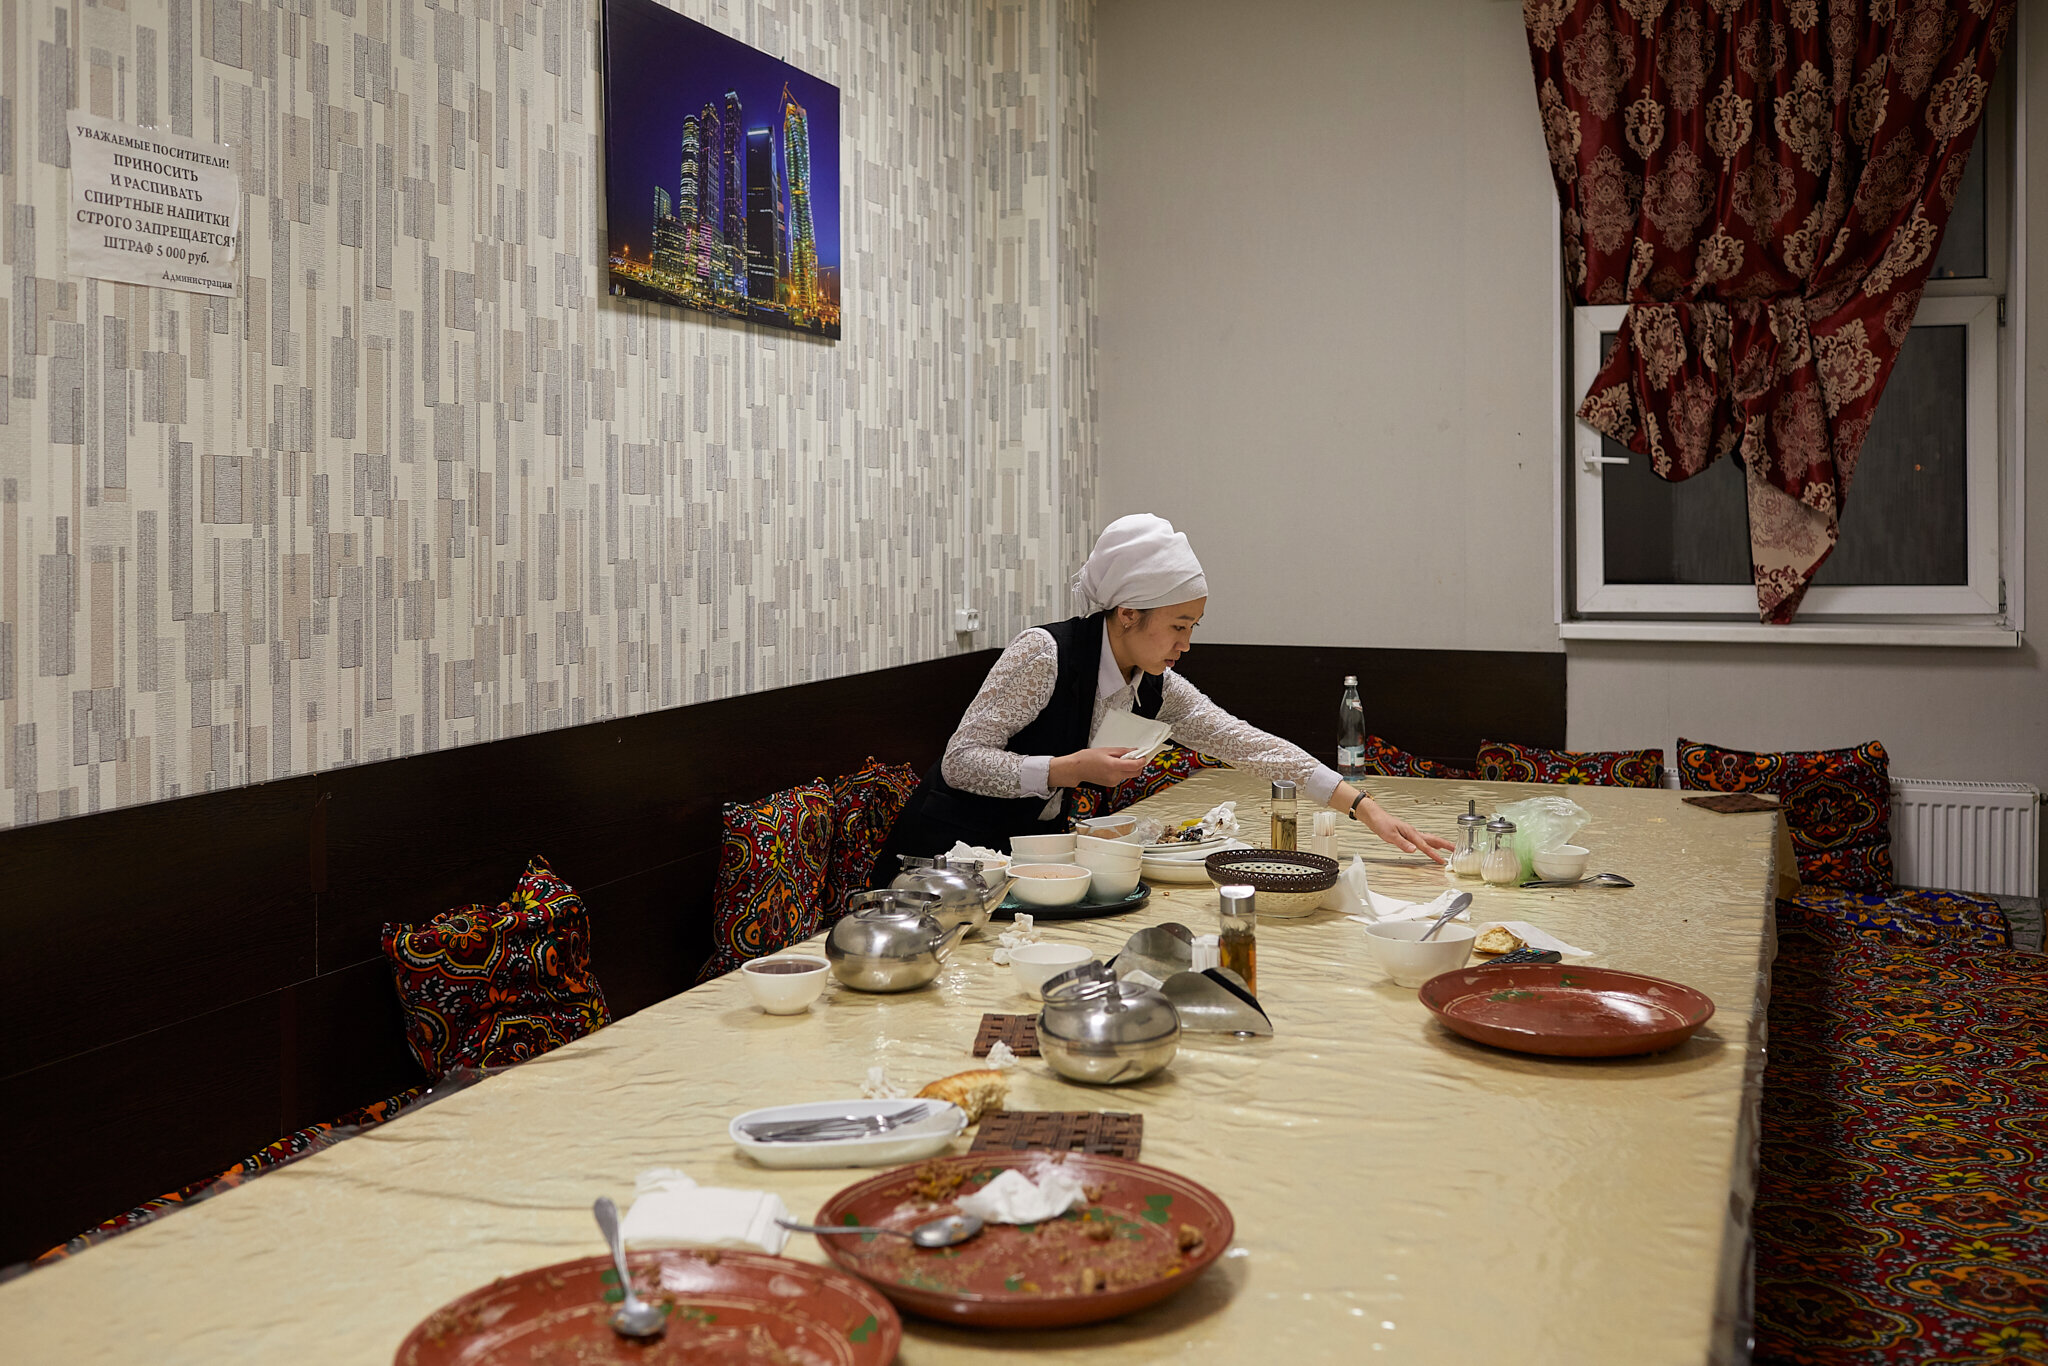  Russia, Moscow, chaikhana “Uzgen”, 04/10/2019. Tahmina K., 25, cleans the room after the guests. The chaikhana “Uzgen” consists of separate rooms. Each room is decorated with traditional carpets “Toshok” and pillows. The chaikhana “Uzgen” is open 24